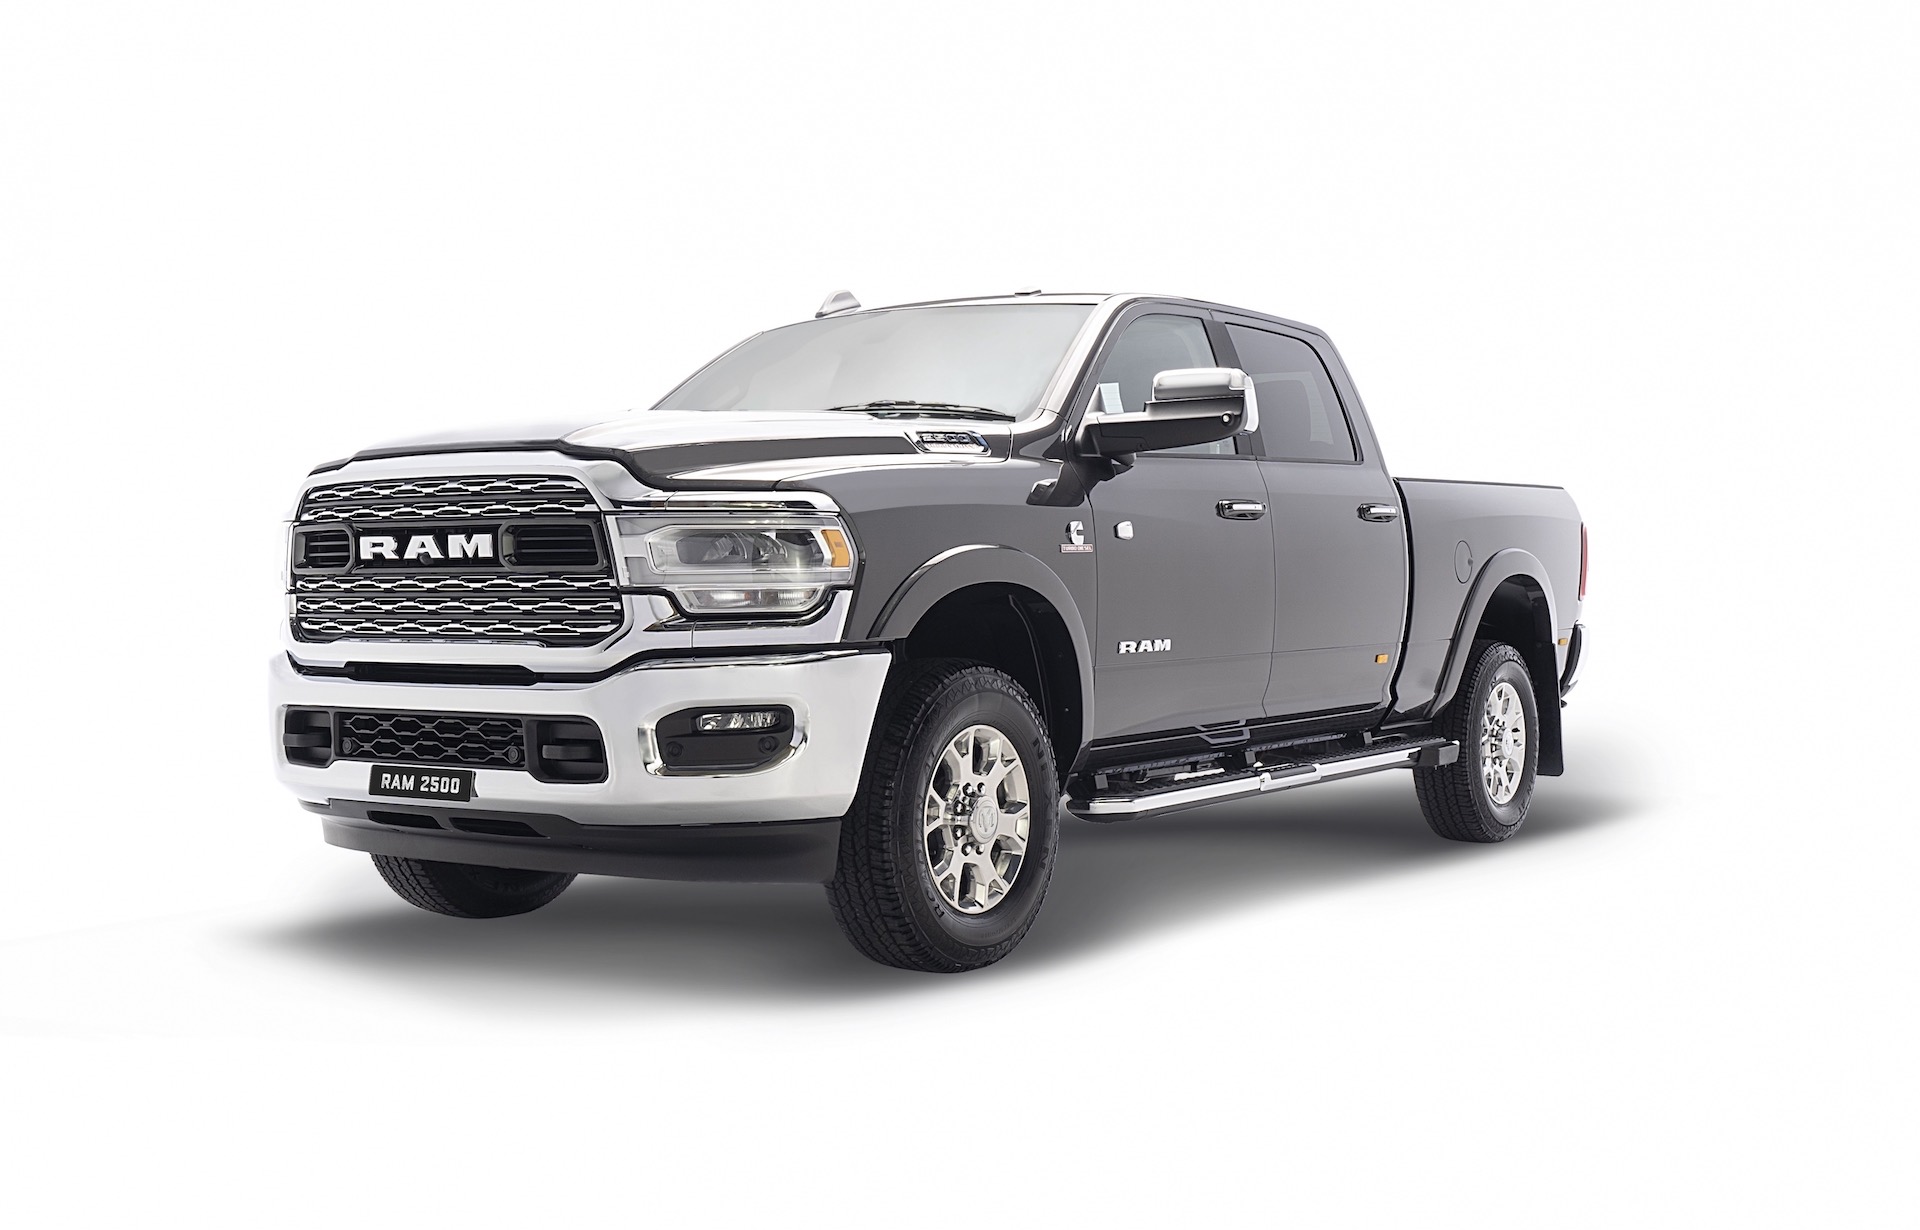 2021 RAM 2500 now on sale in Australia, priced from $157,950